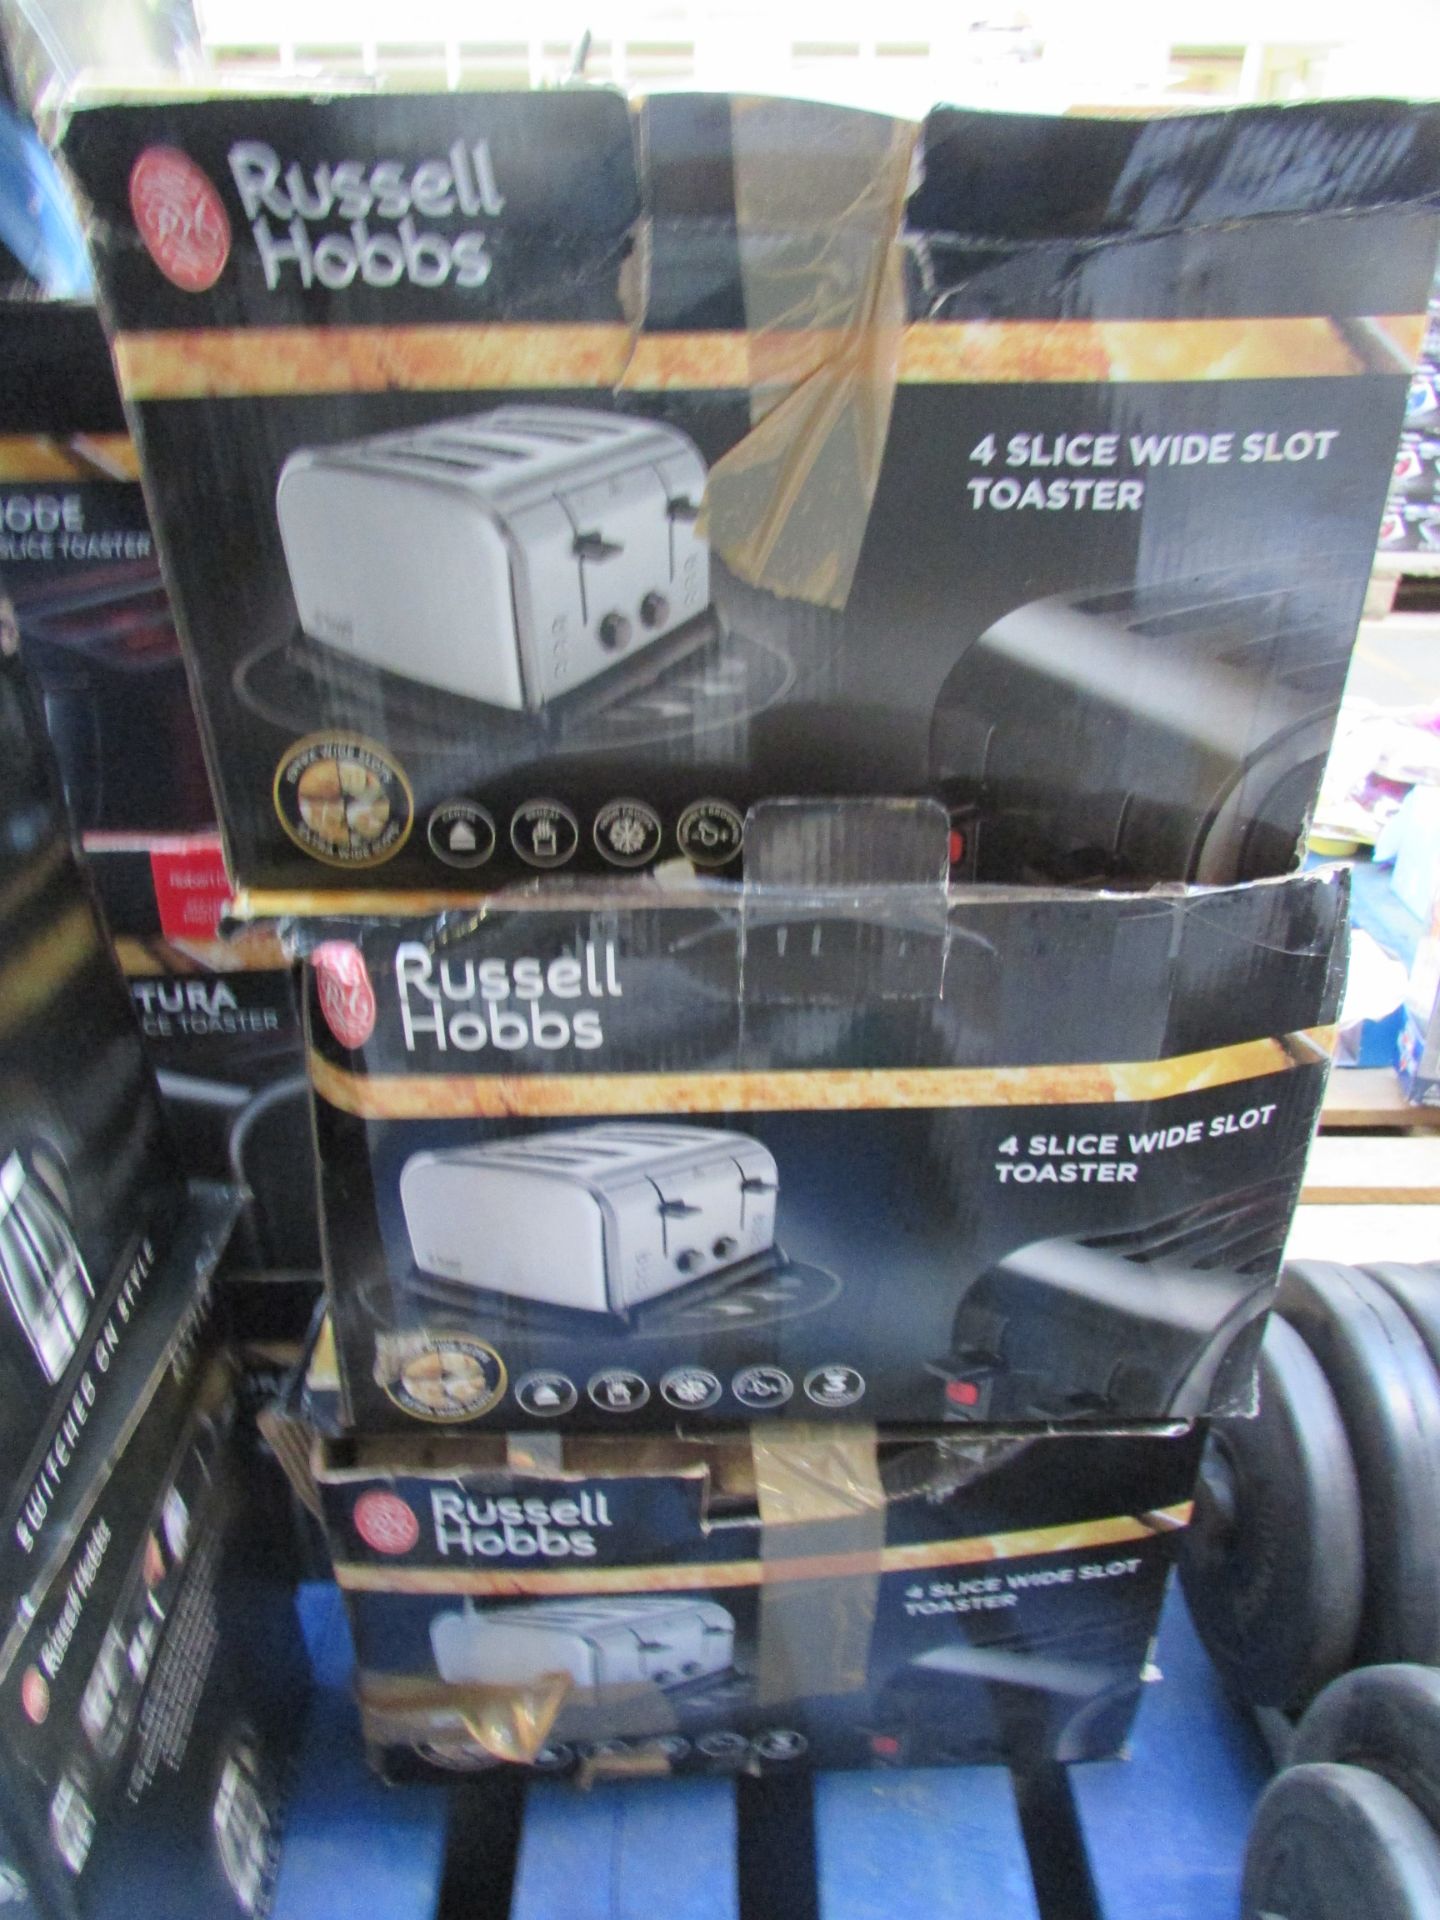 3X RUSSELL HOBBS 4 SLICE WIDE SLOT TOASTER